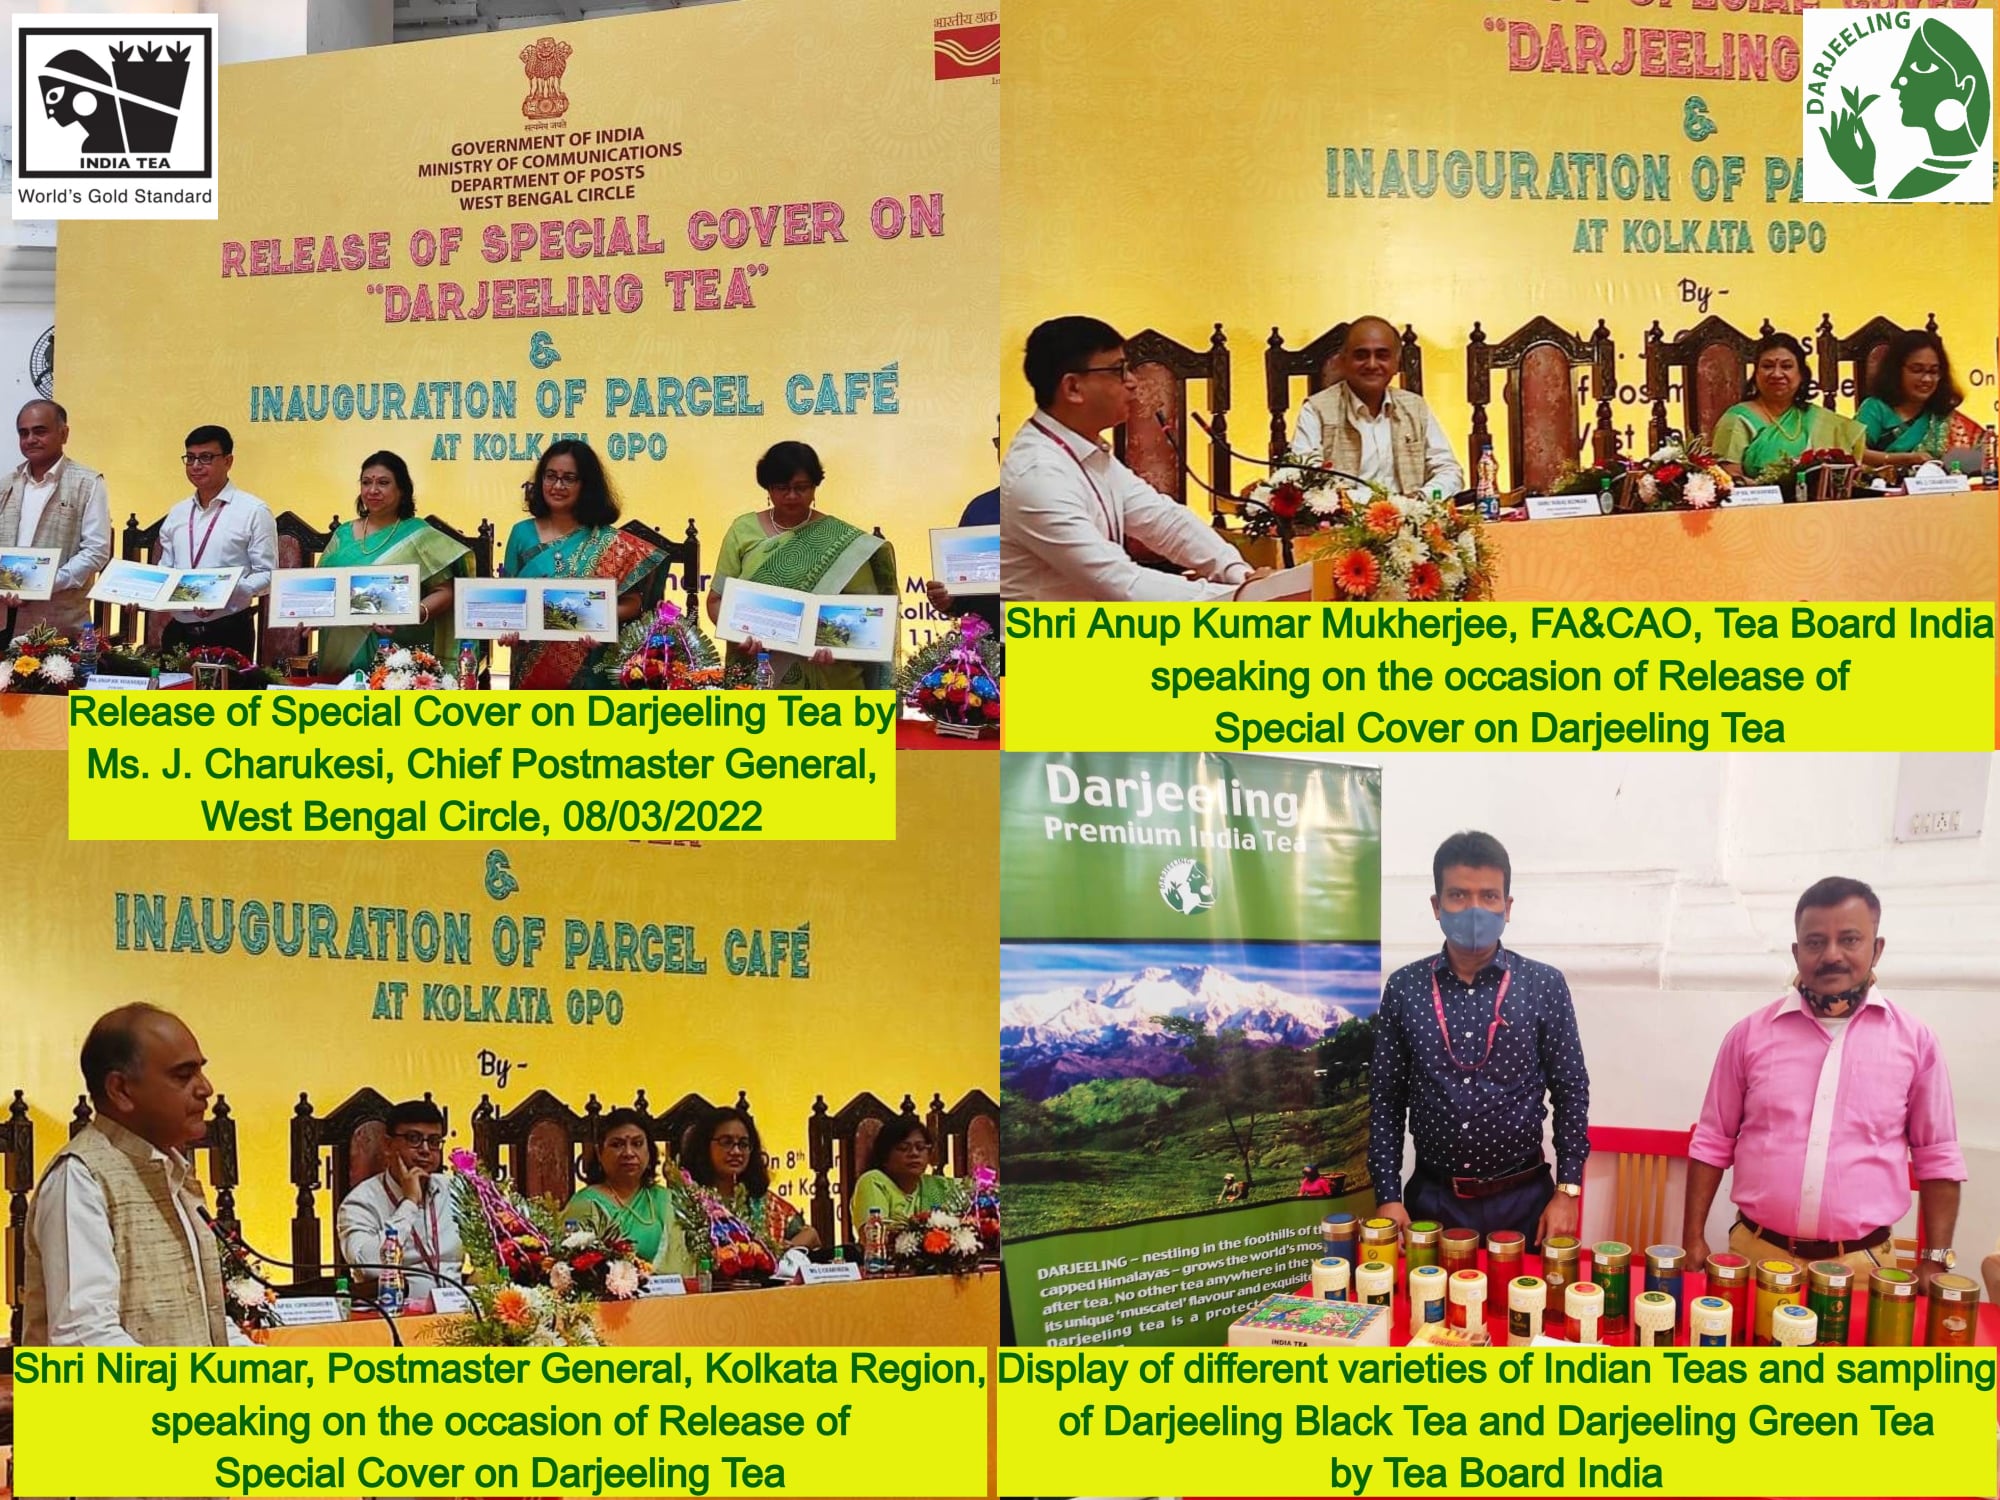 Release of Special Cover on Darjeeling Tea by Ms. J. Charukesi, Chief Postmaster General, West Bengal Circle. Shri Anup Kumar Mukherjee, FA&CAO, Tea Board India graced the occasion as 'Guest of Honour', 08-03-2022